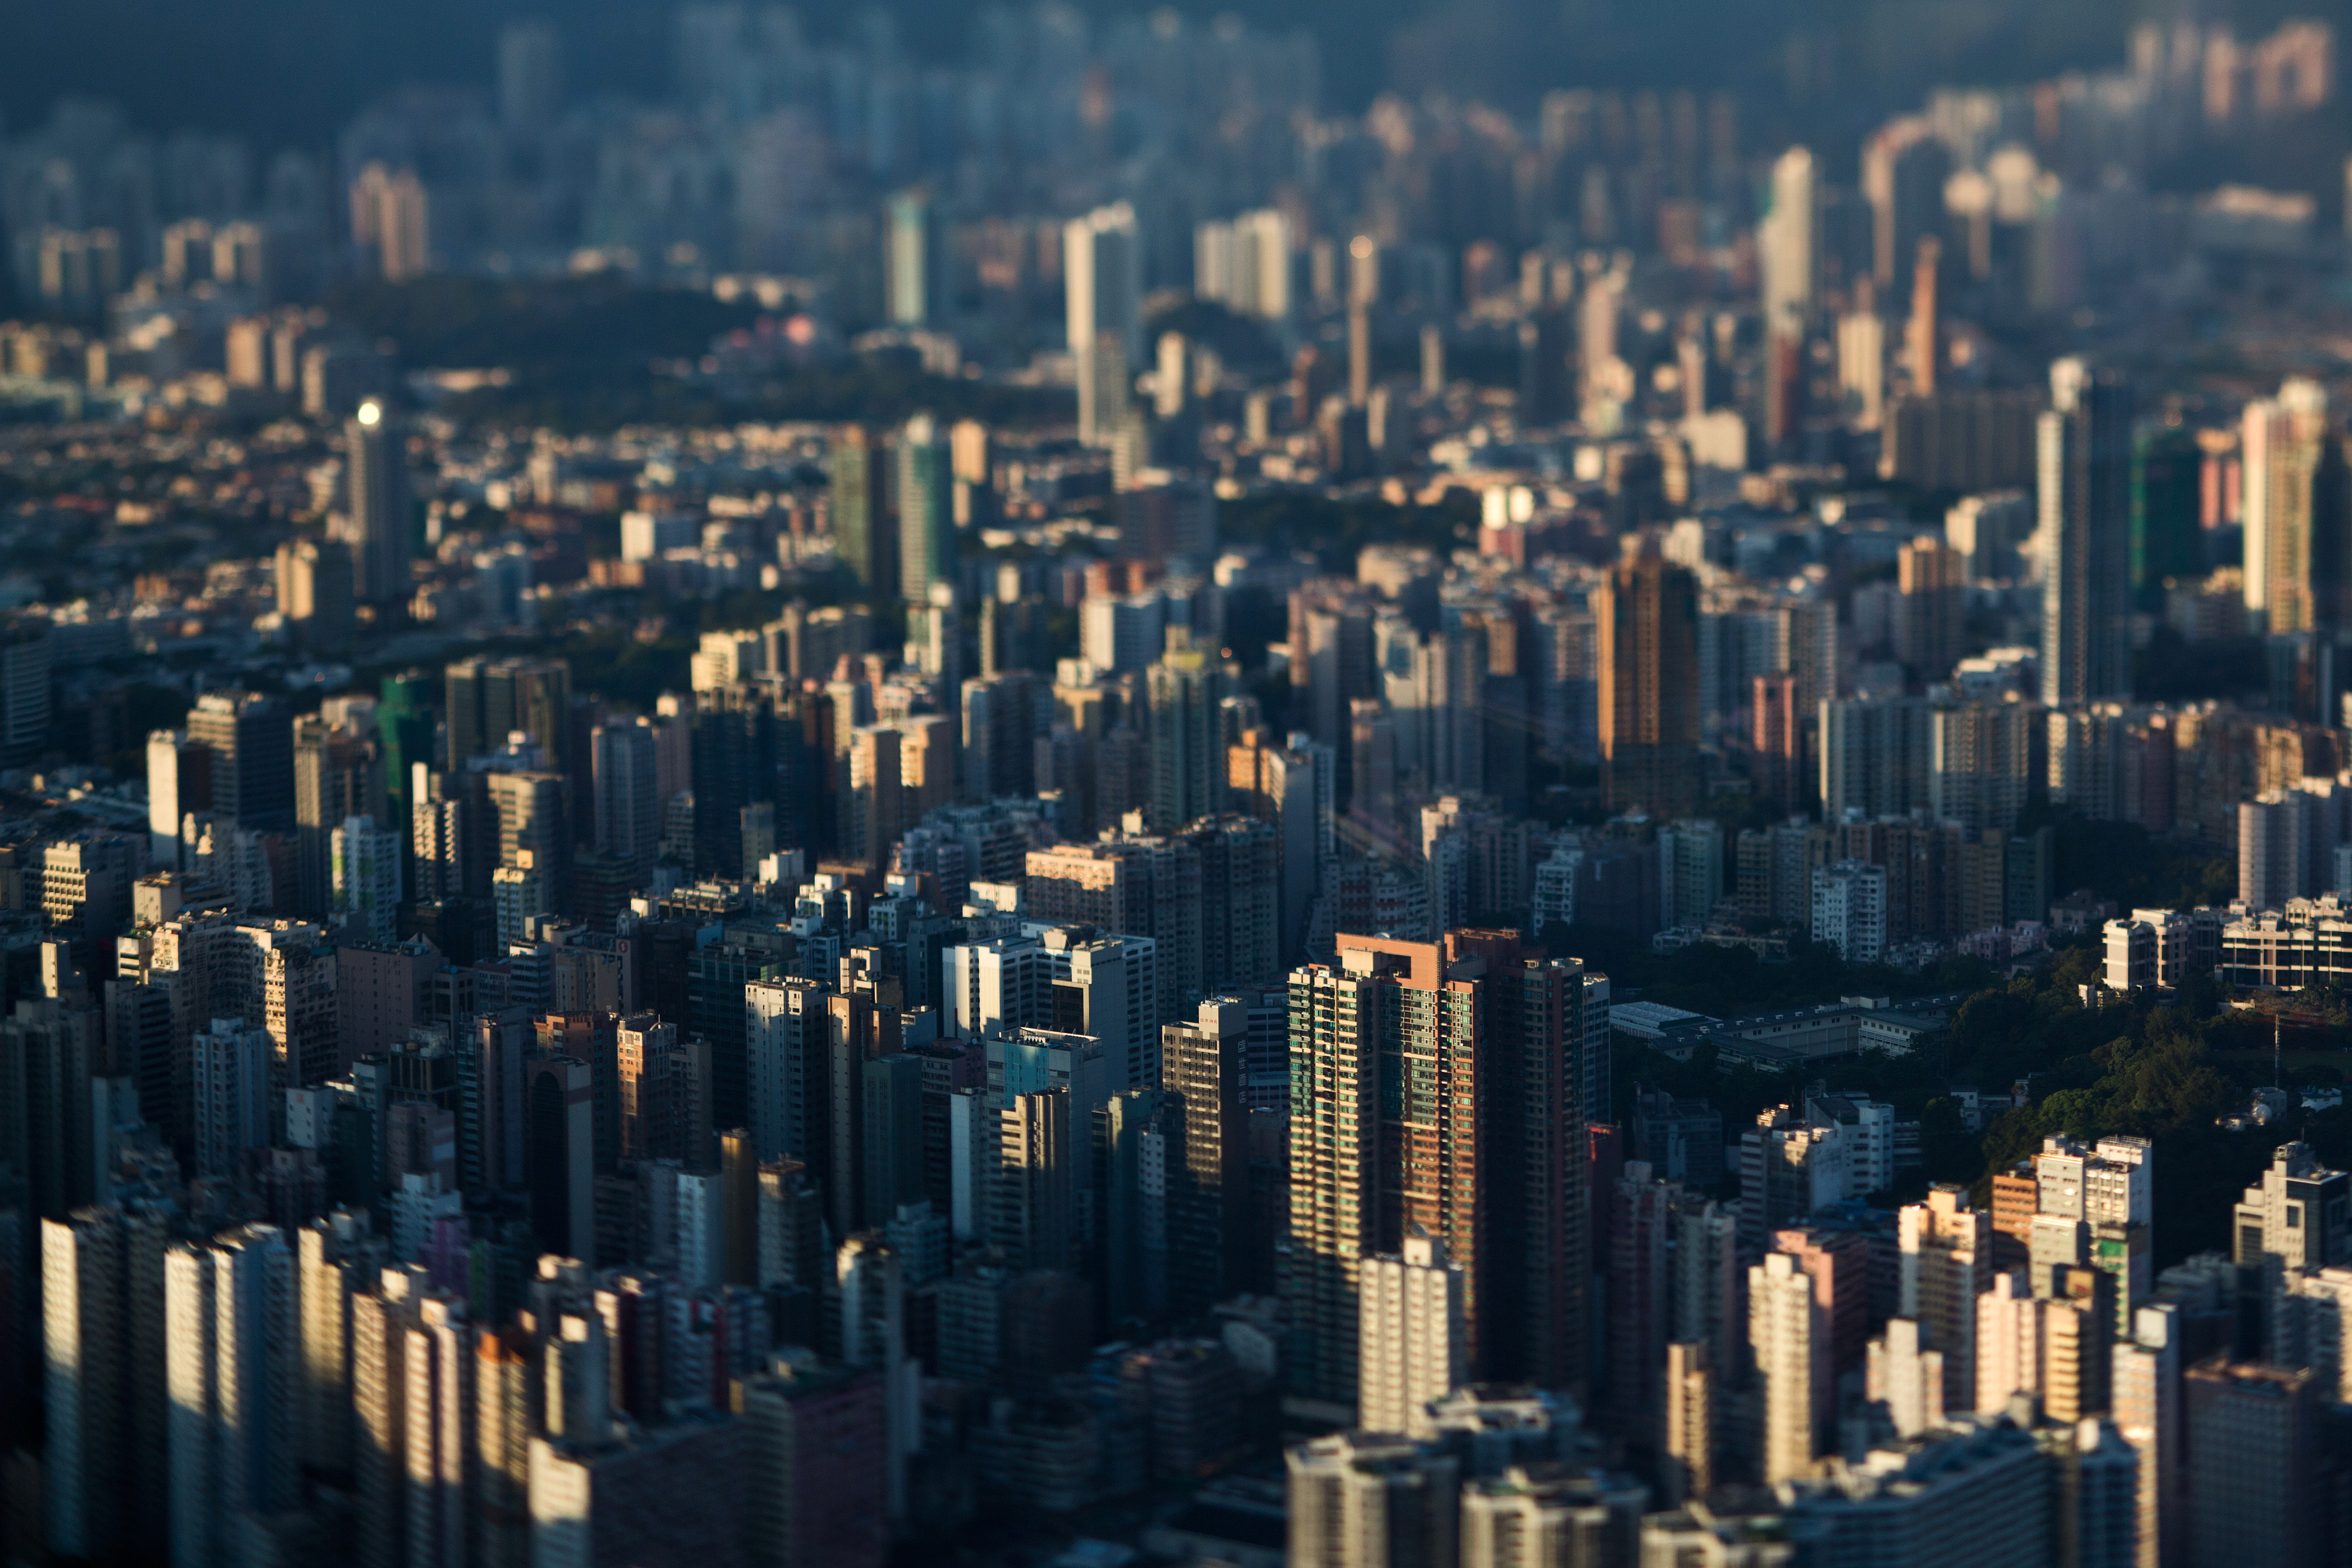 Commercial and residential buildings stand in the West Kowloon district in this photograph taken with a tilt-shift lens in Hong Kong on July 21, 2016 (Seong-Joon Cho—Bloomberg/Getty Images)